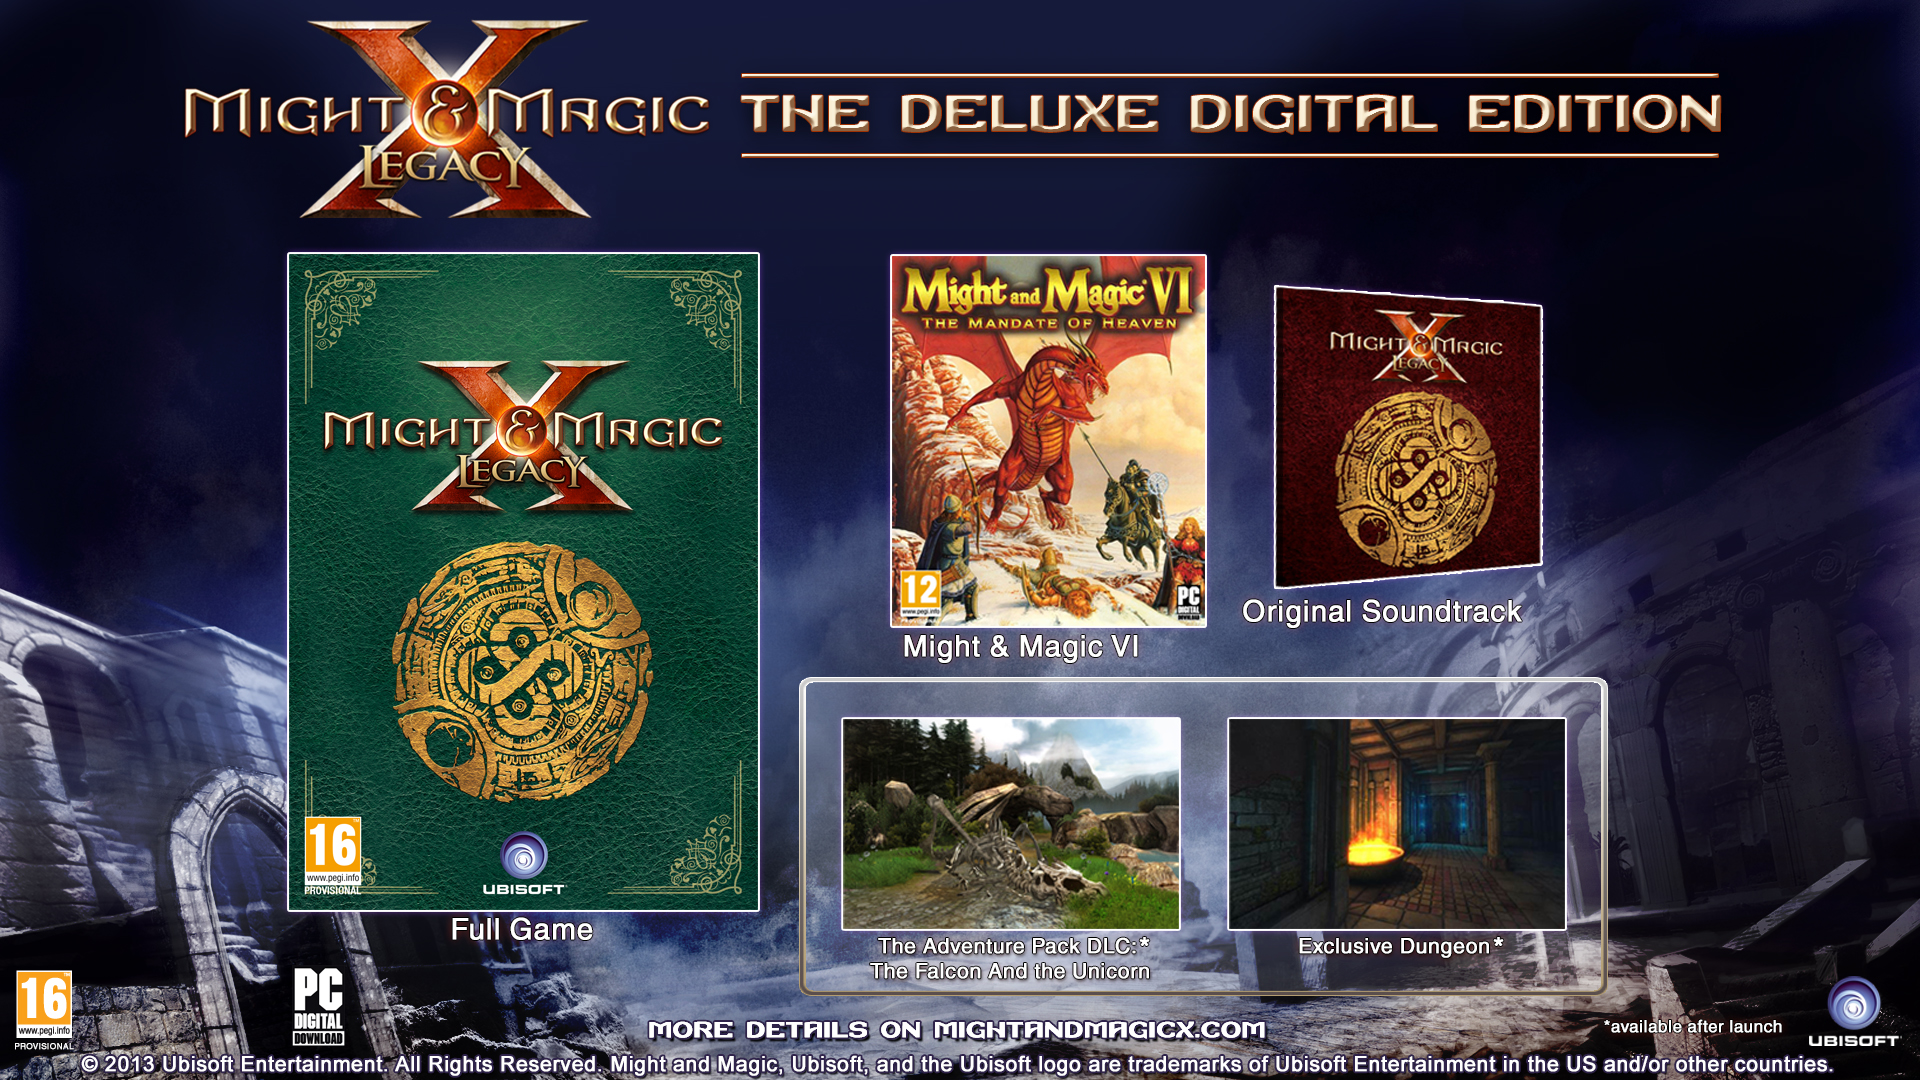 Find the best laptops for Might & Magic X - Legacy